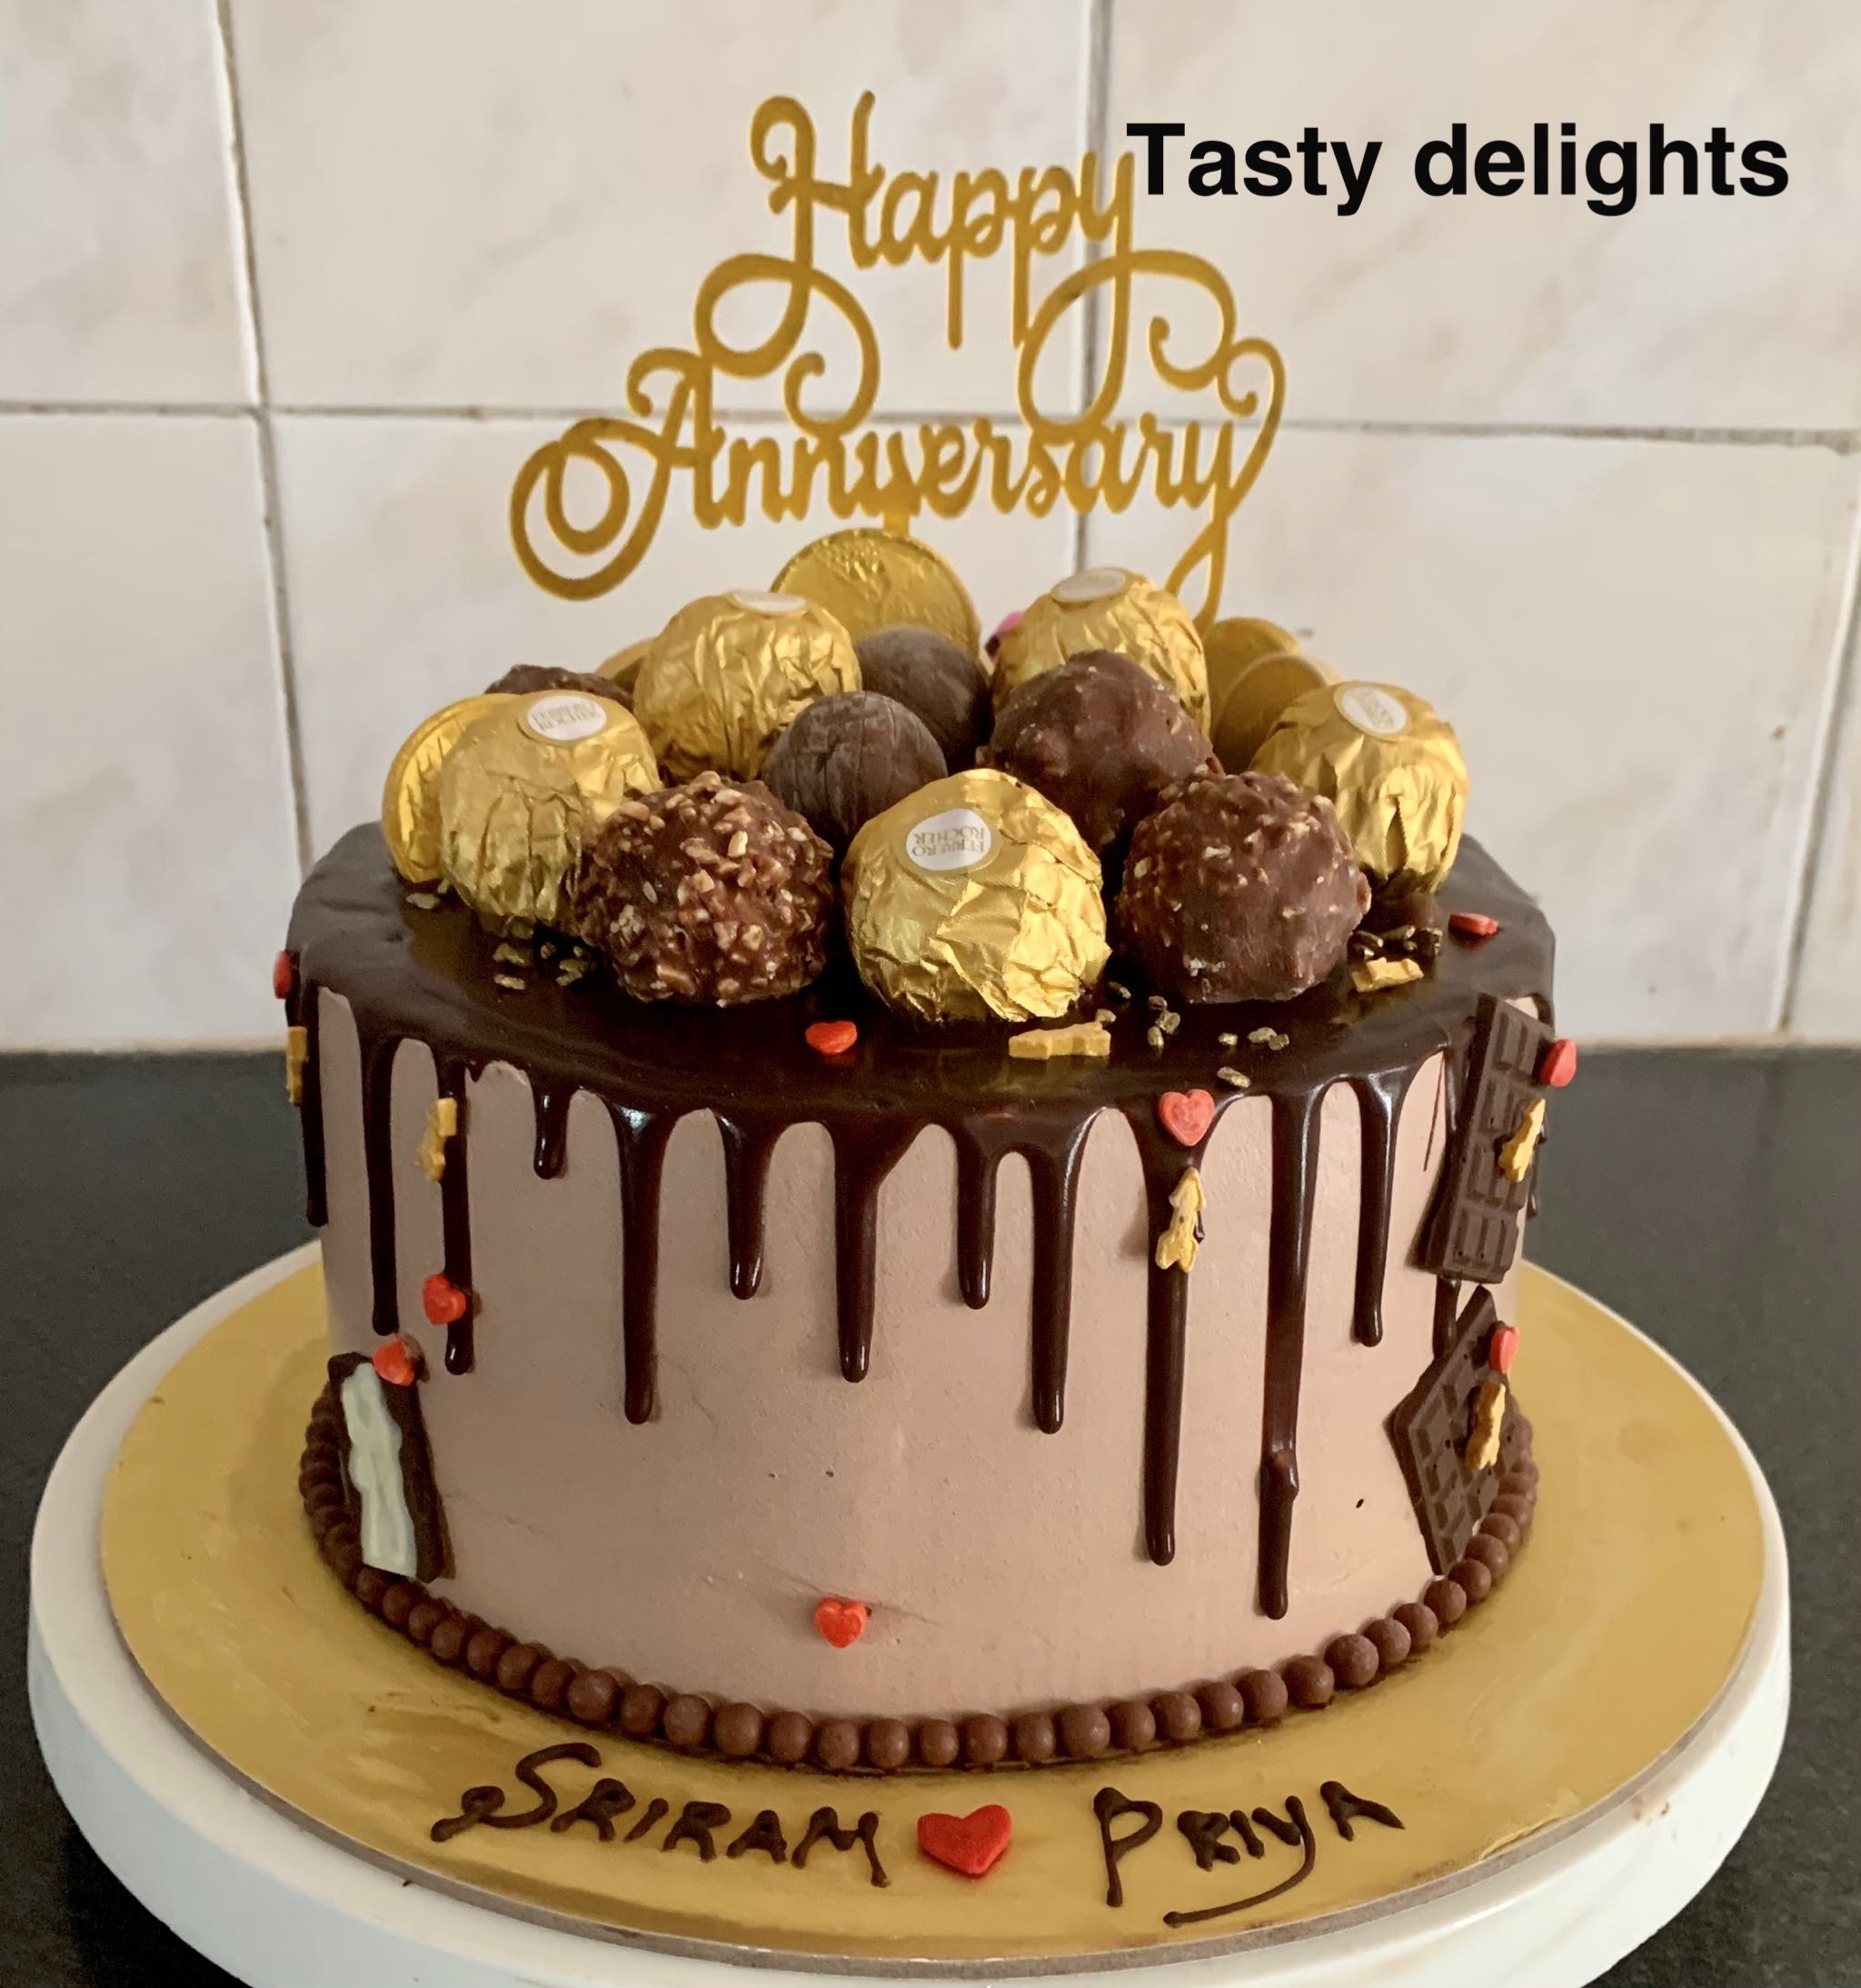 Pull out happiness from money pulling cake Singapore 2022 | My Tings Bakery